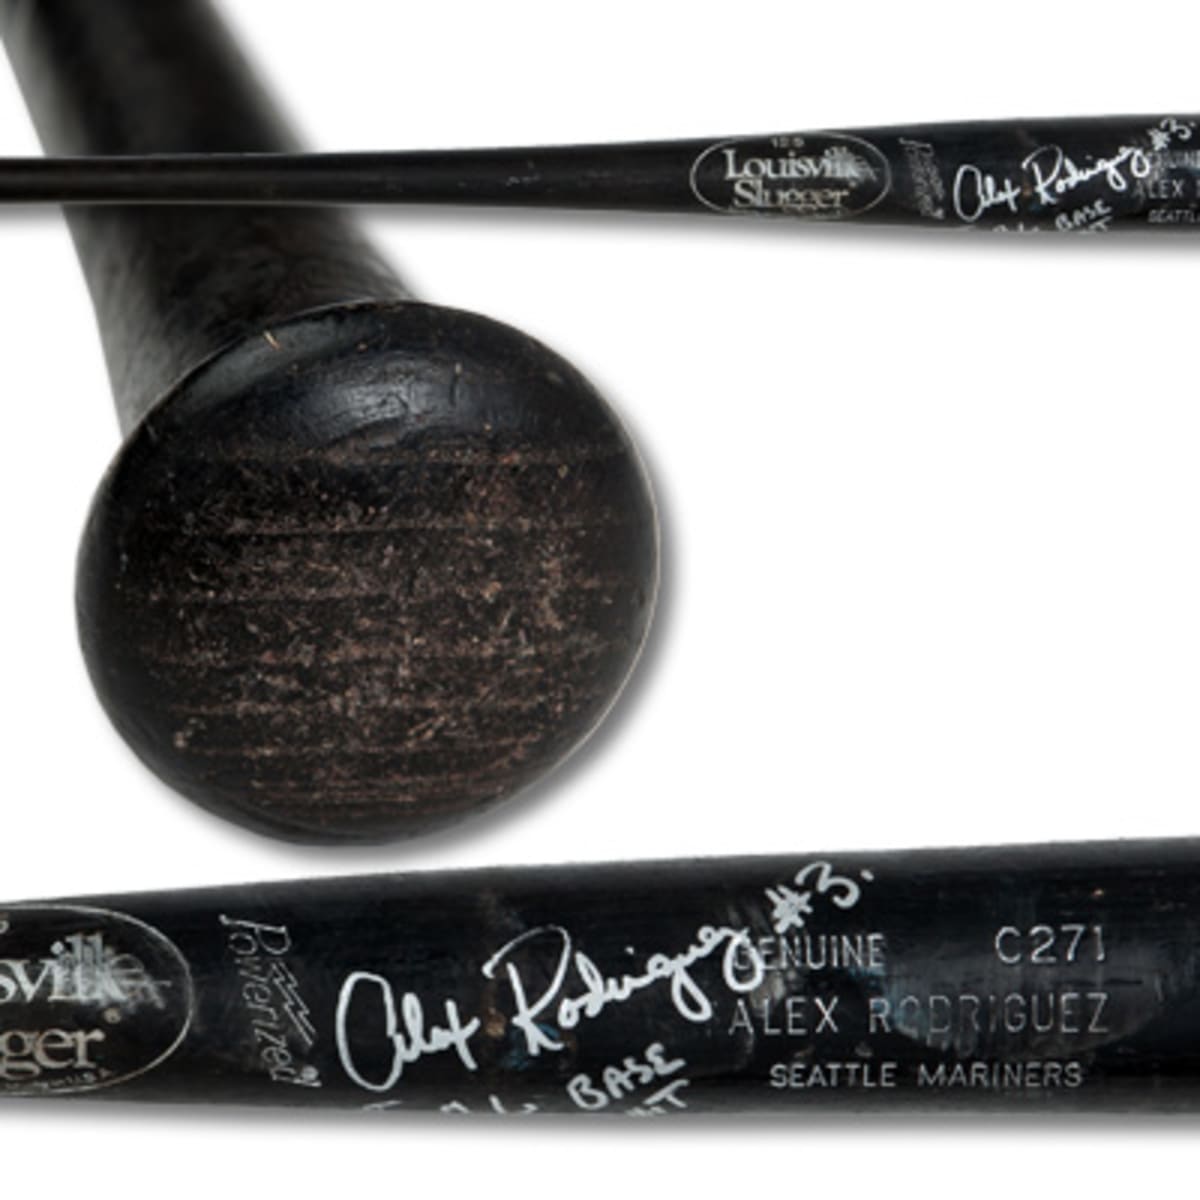 Alex Rodriguez's First-Hit Bat from 1994 Could Bring $20K - Sports